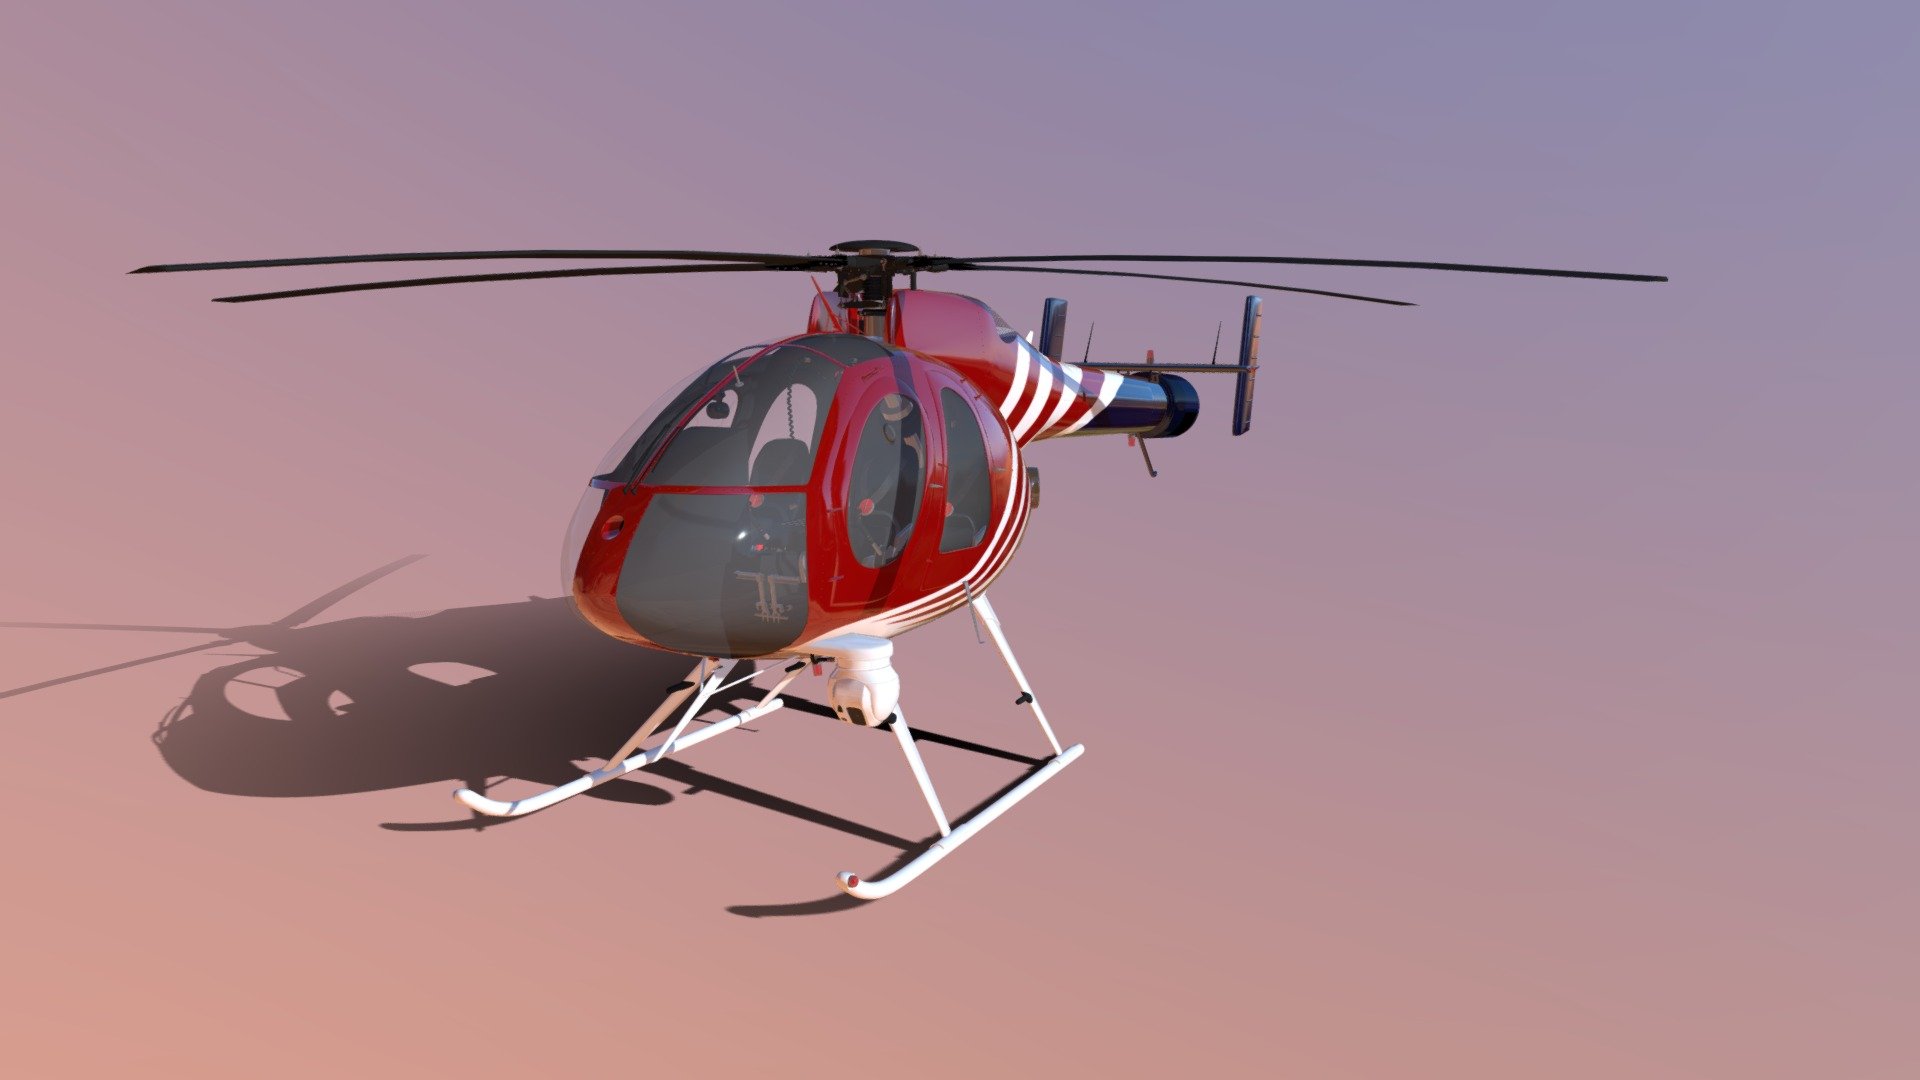 MD-520N NOTAR Helicopter textured in a patriotic scheme with all axis points ready for animating.  This model is native to C4D as a fully rigged model with controls and lighting at the click of a button or the use of a slider.  UVW mapped with textures at least 4K or better.

Formats:  C4D (Rigged, Native), 3DS, DAE, FBX, Blender, OBJ - MD 520N NOTAR Helicopter - Buy Royalty Free 3D model by rohr3dsolutions 3d model